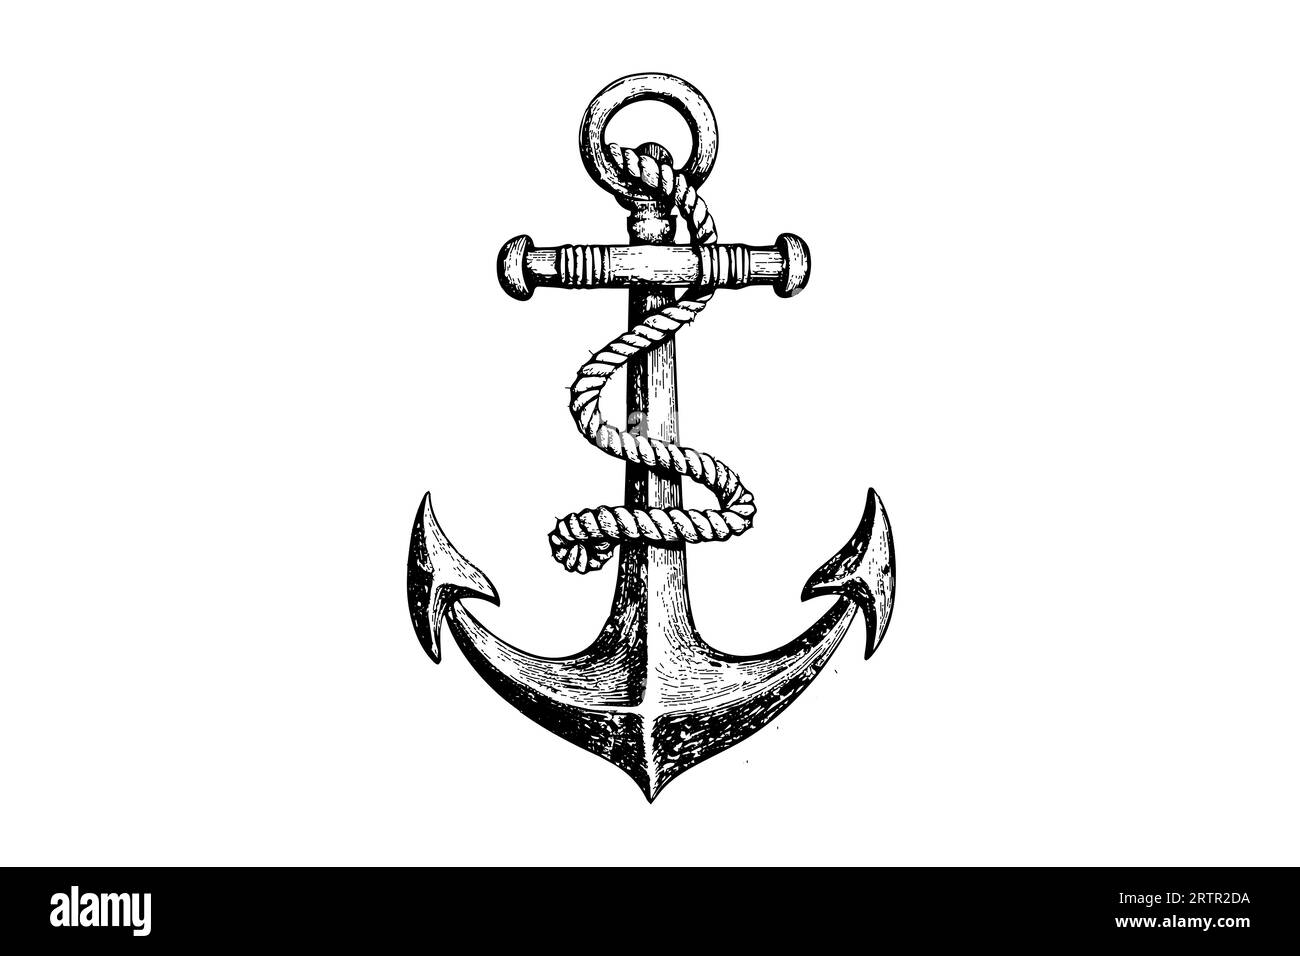 Ship anchor and rope in vintage engraving style. Sketch hand drawn vector illustration. Stock Vector